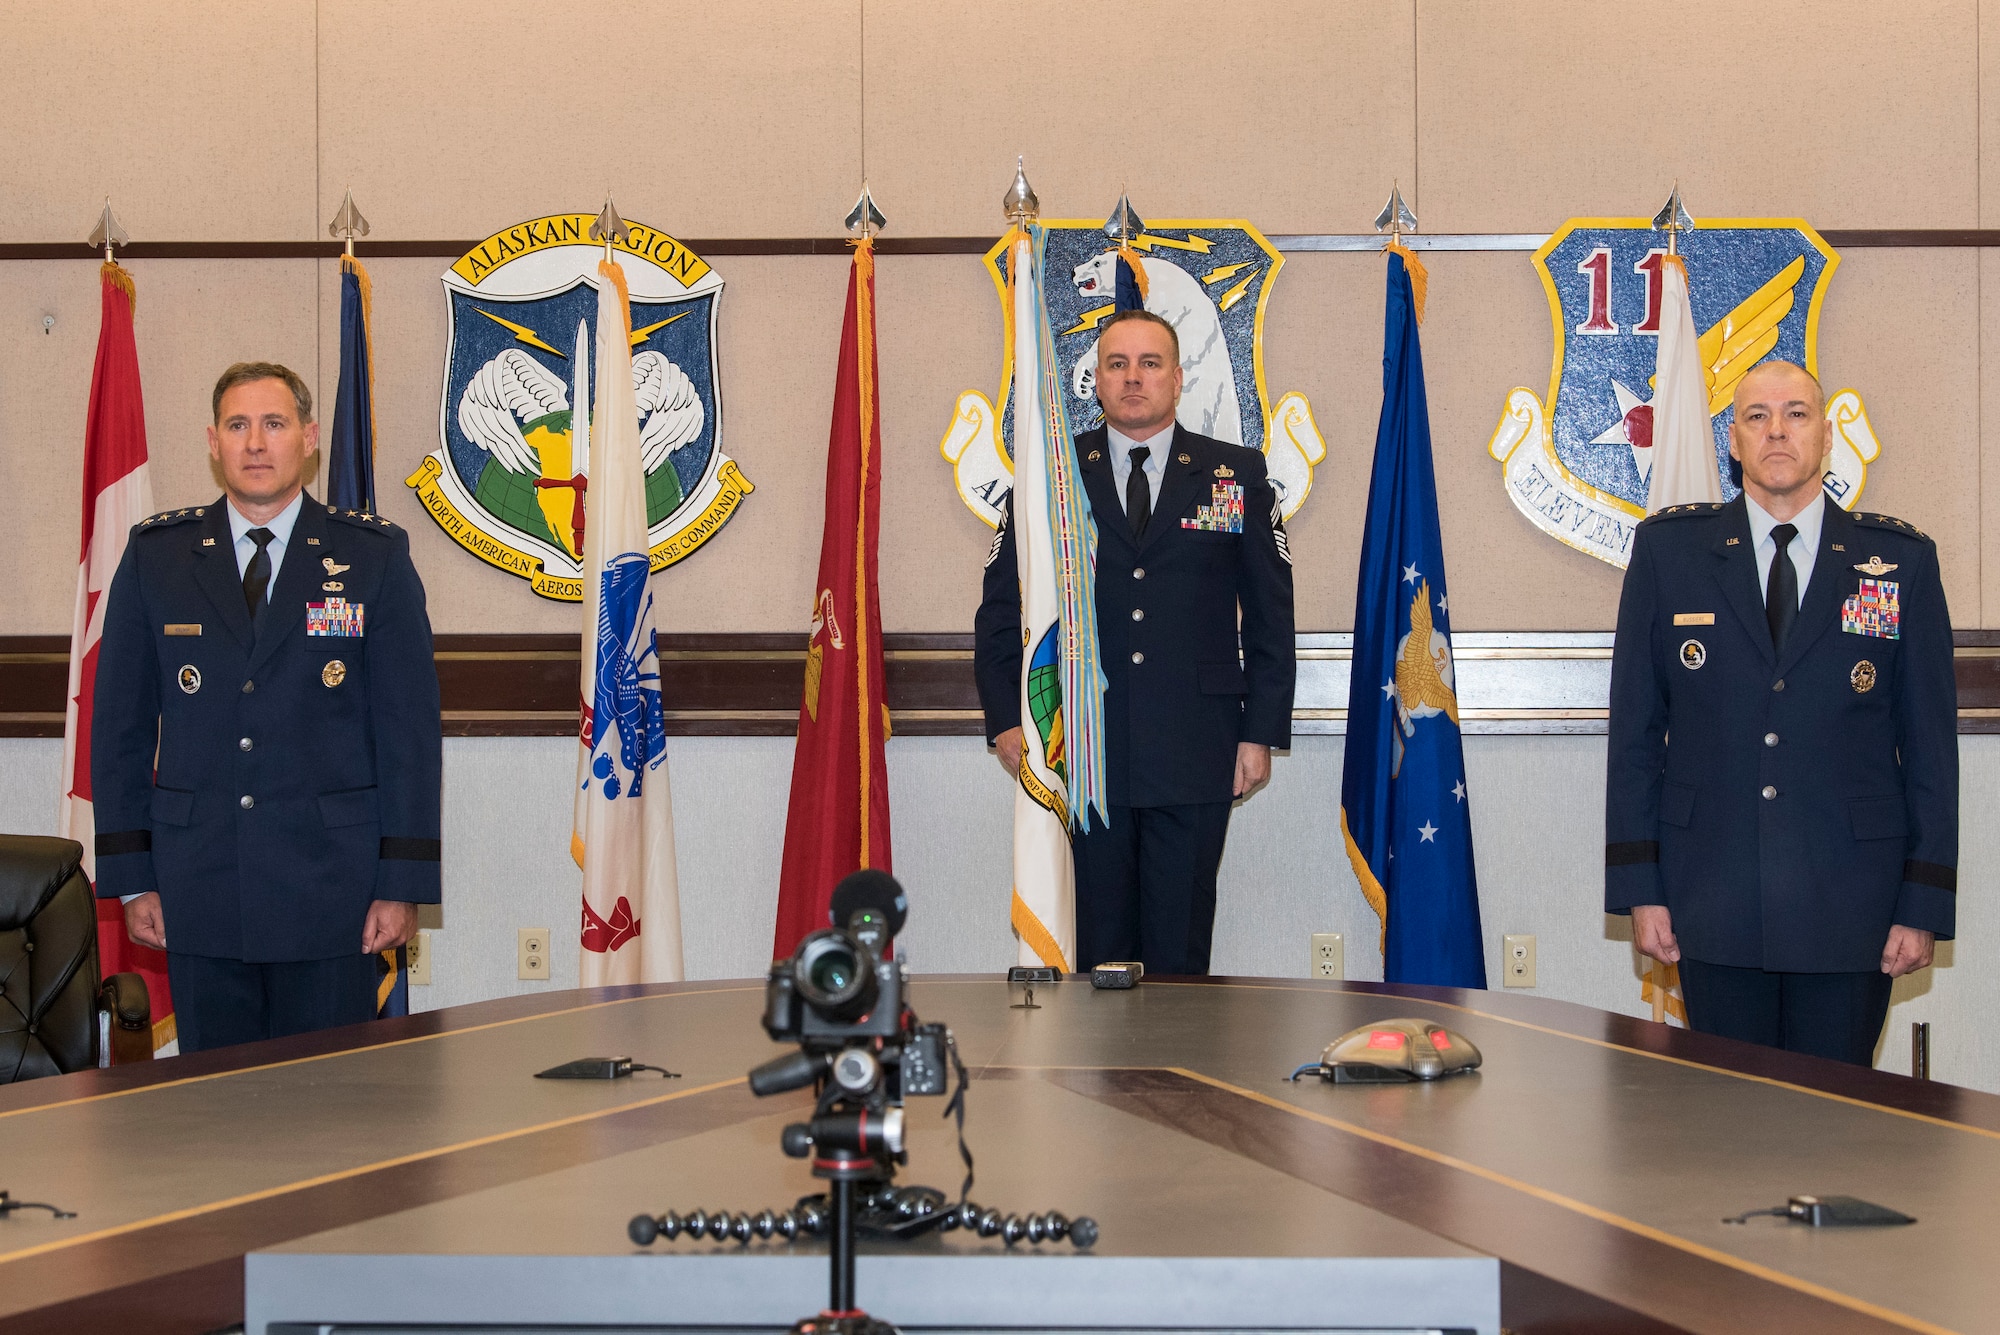 U.S. Air Force Lt. Gen. David A. Krumm takes command of Alaskan North American Aerospace Defense Command, Alaskan Command, and the Eleventh Air Force from outgoing commander, Lt. Gen. Thomas Bussiere, during a change of command ceremony April 20, 2020 at Joint Base Elmendorf-Richardson, Alaska. Due to physical restrictions of the ongoing COVID-19 pandemic, the virtual change of command ceremony was presided over via video teleconference by Air Force Gen. Terrence O’Shaughnessy, commander of the North American Aerospace Defense Command and United States Northern Command, and Air Force Gen. Charles Q. Brown, Pacific Air Forces commander.